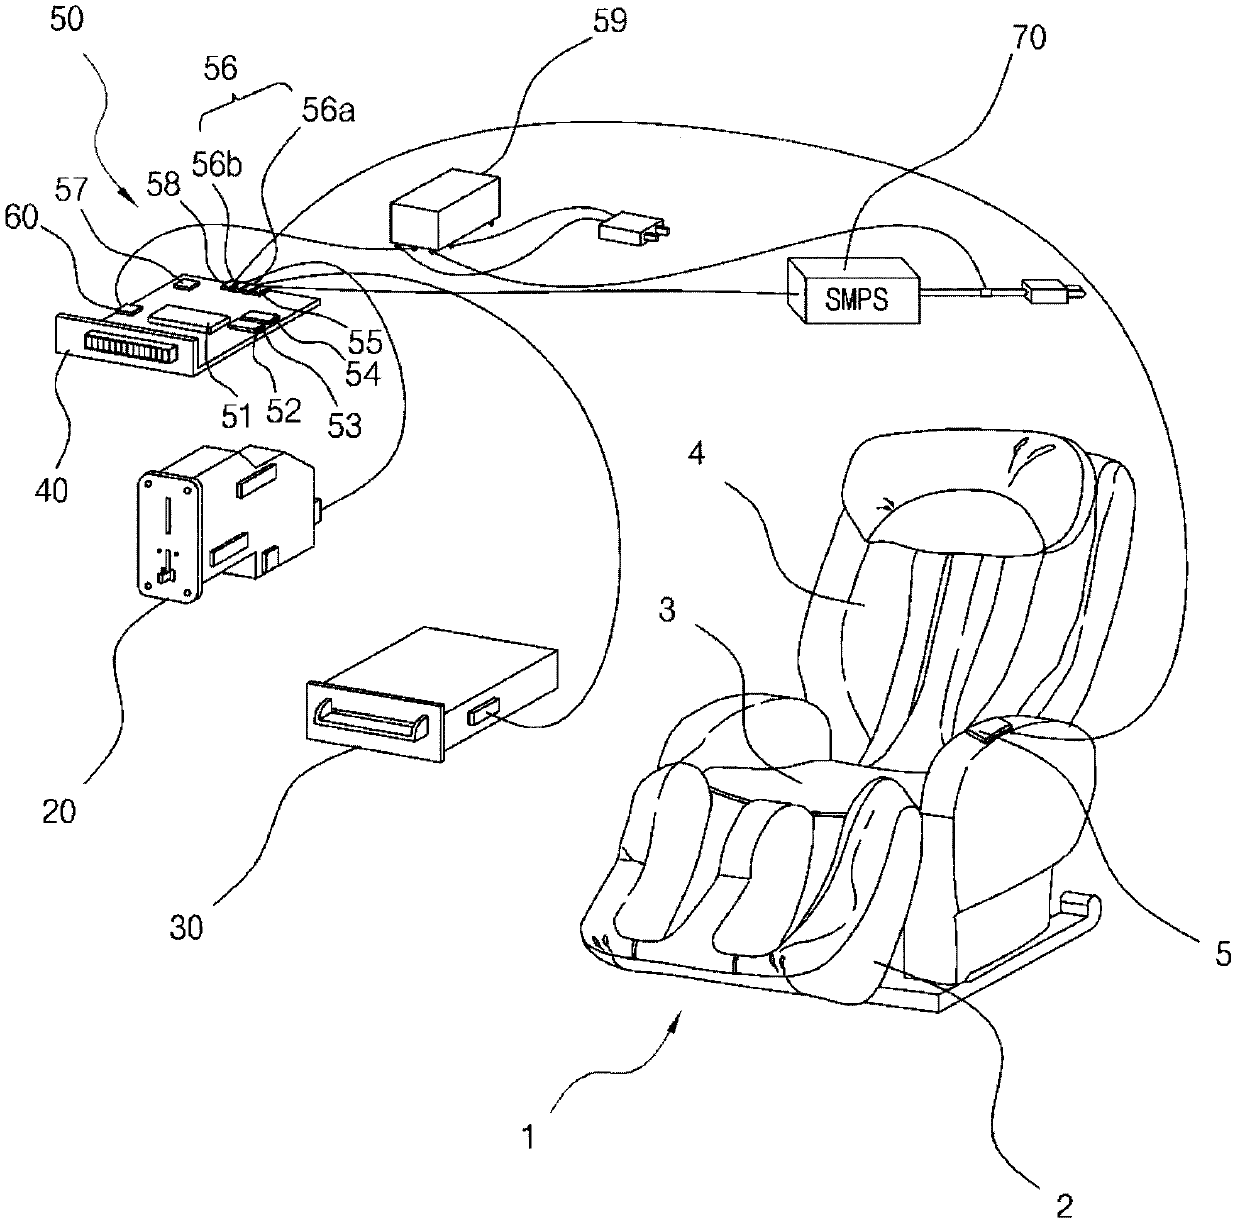 Device and method for controlling massage chair with reclining function